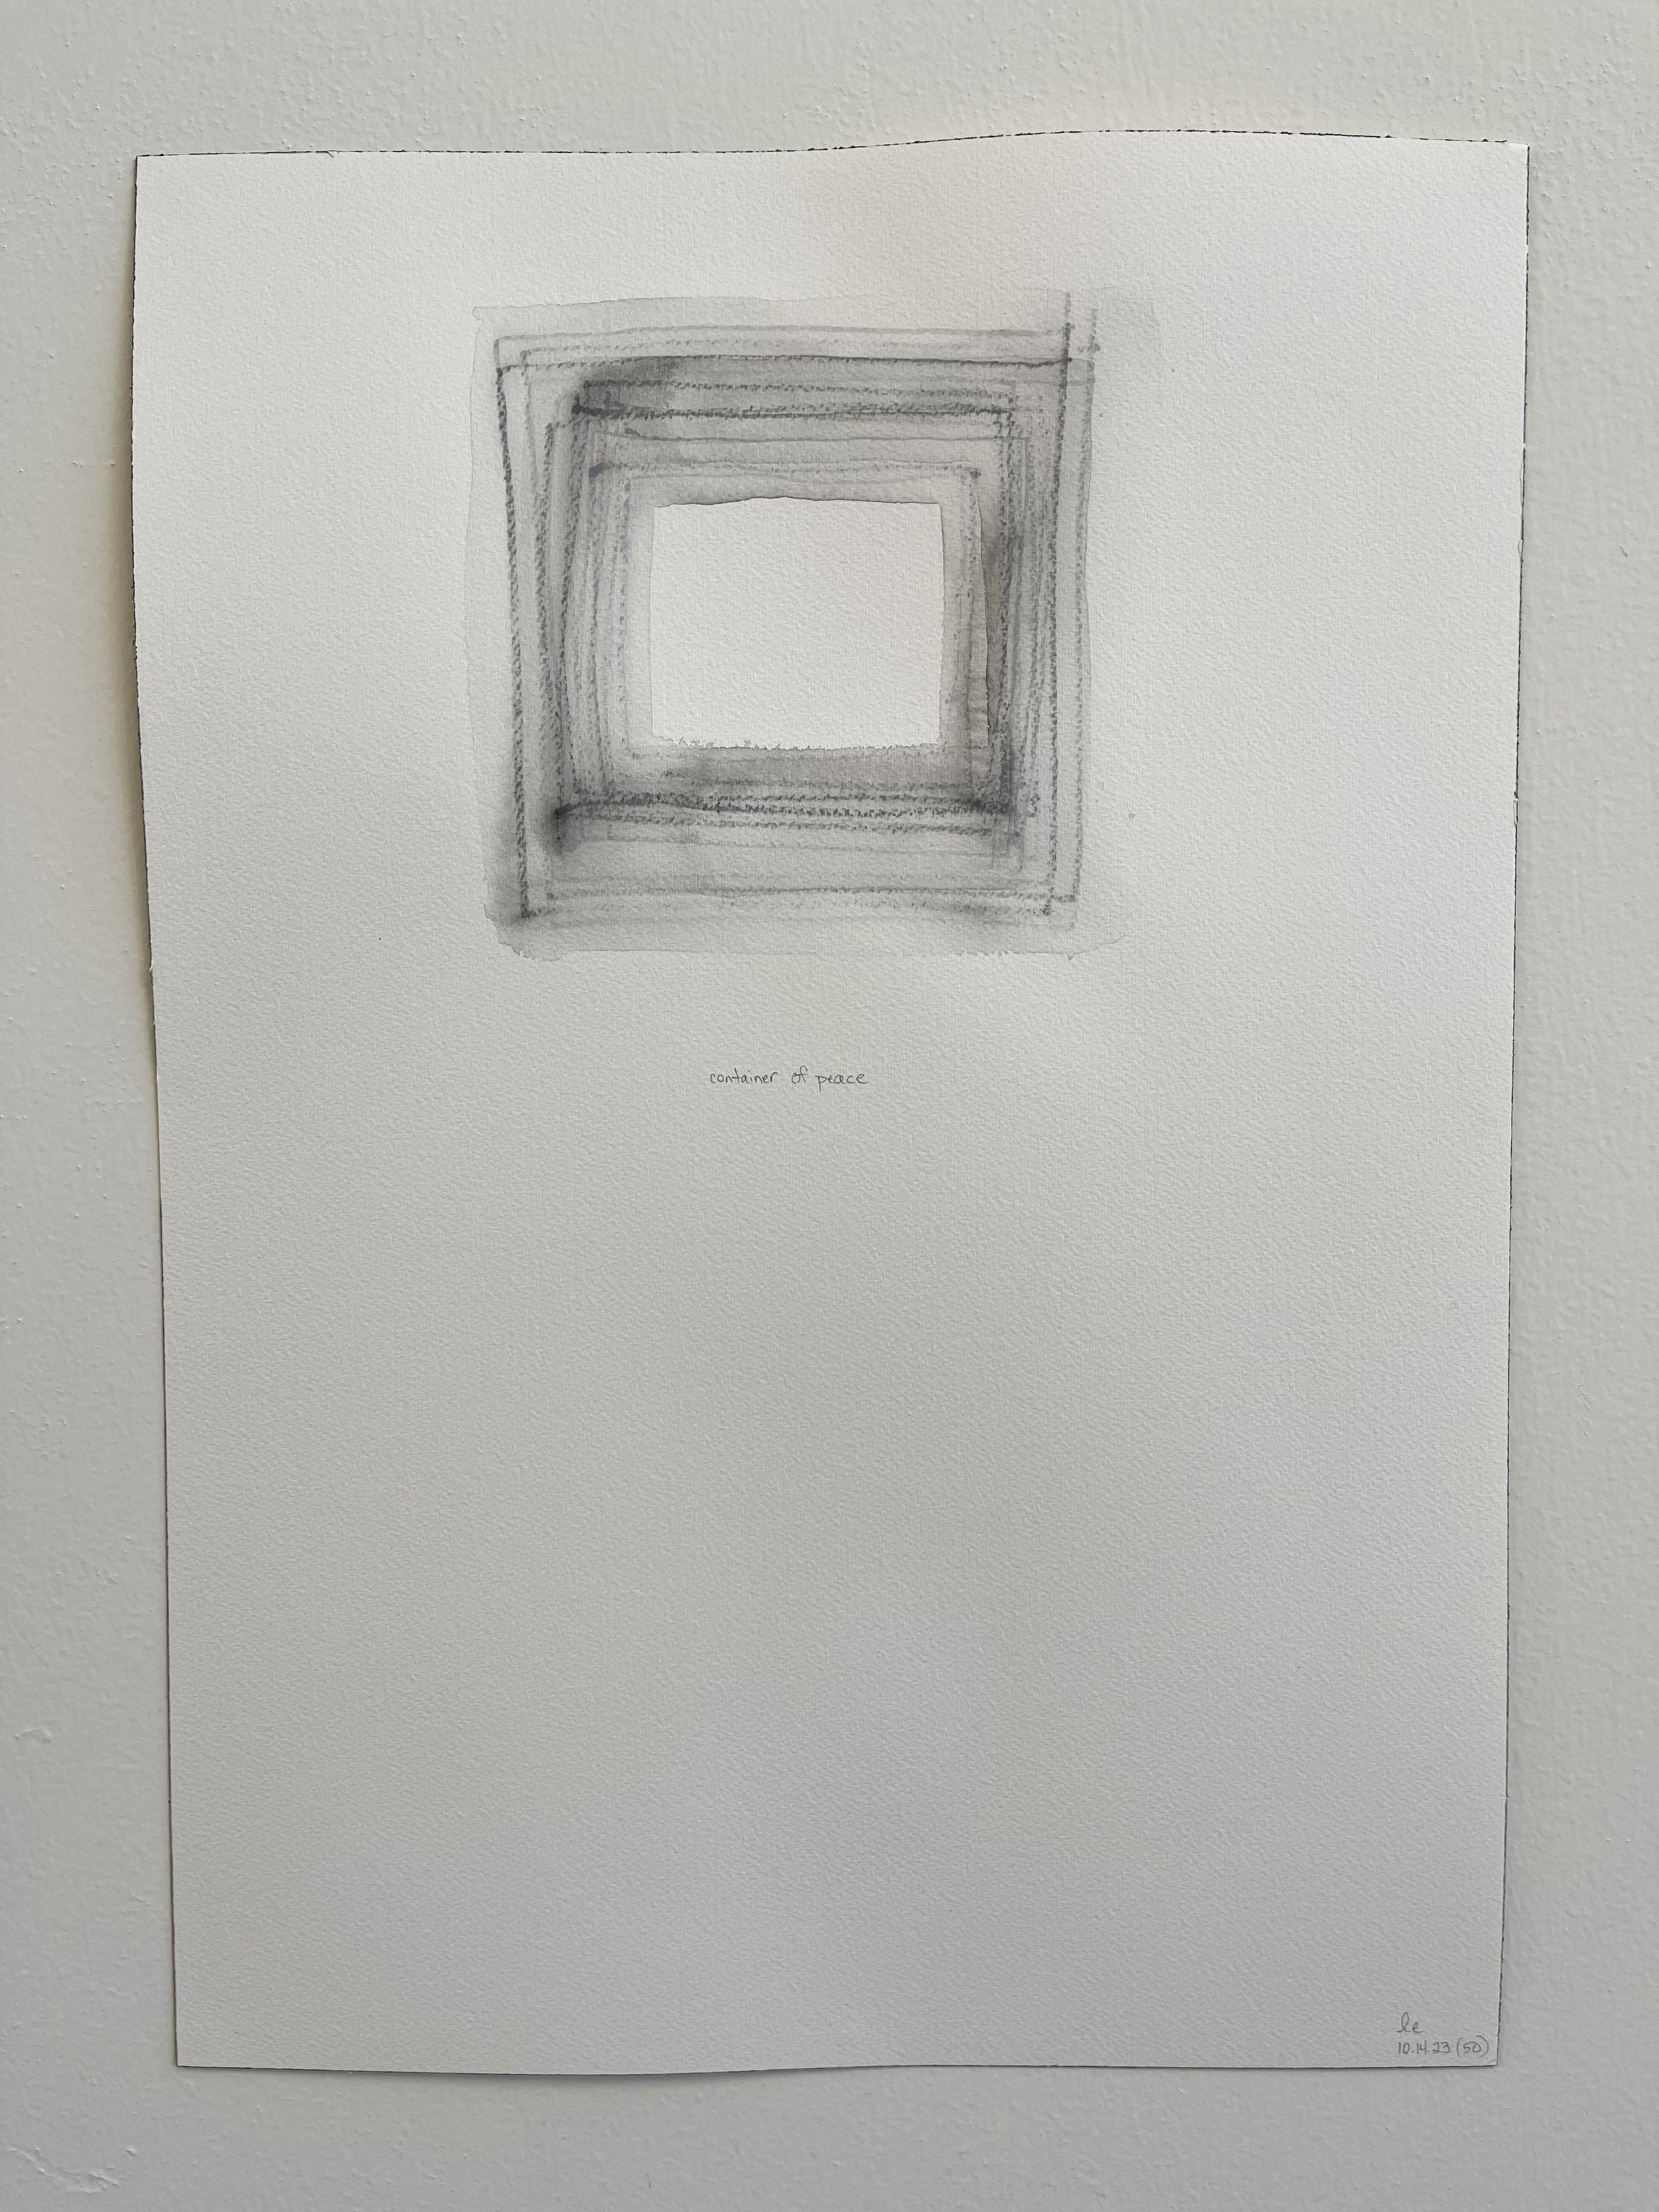 container of peace (50), 2023 | watercolor pencil on Arches paper | 14" x 20"